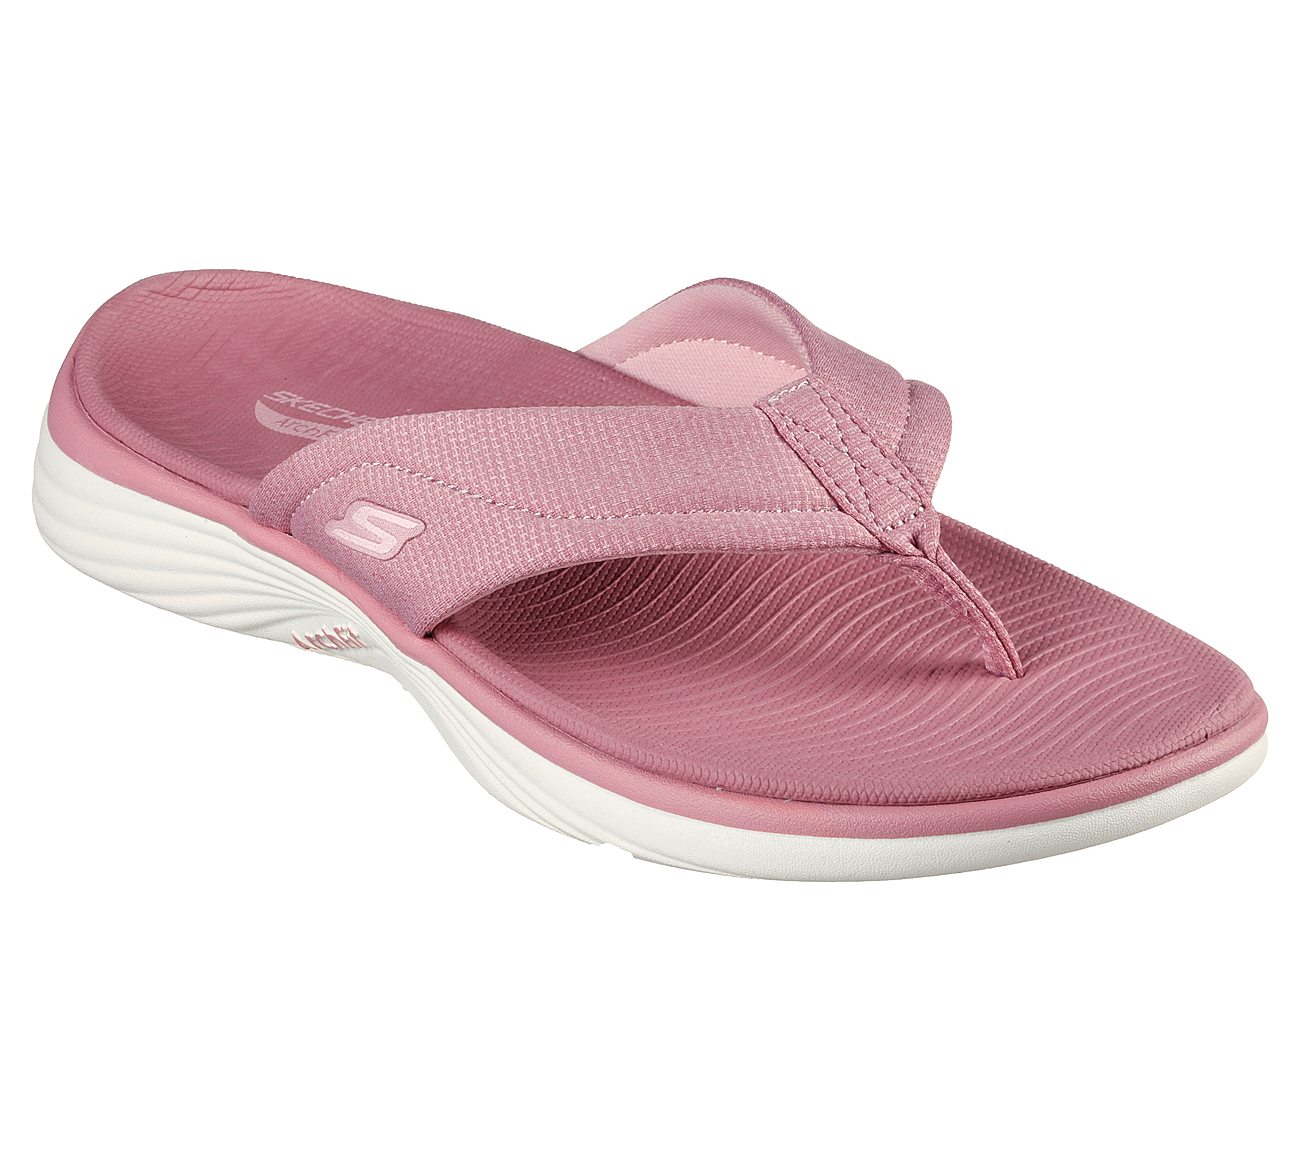 ARCH FIT RADIANCE - GLEAM, MMAUVE Footwear Right View